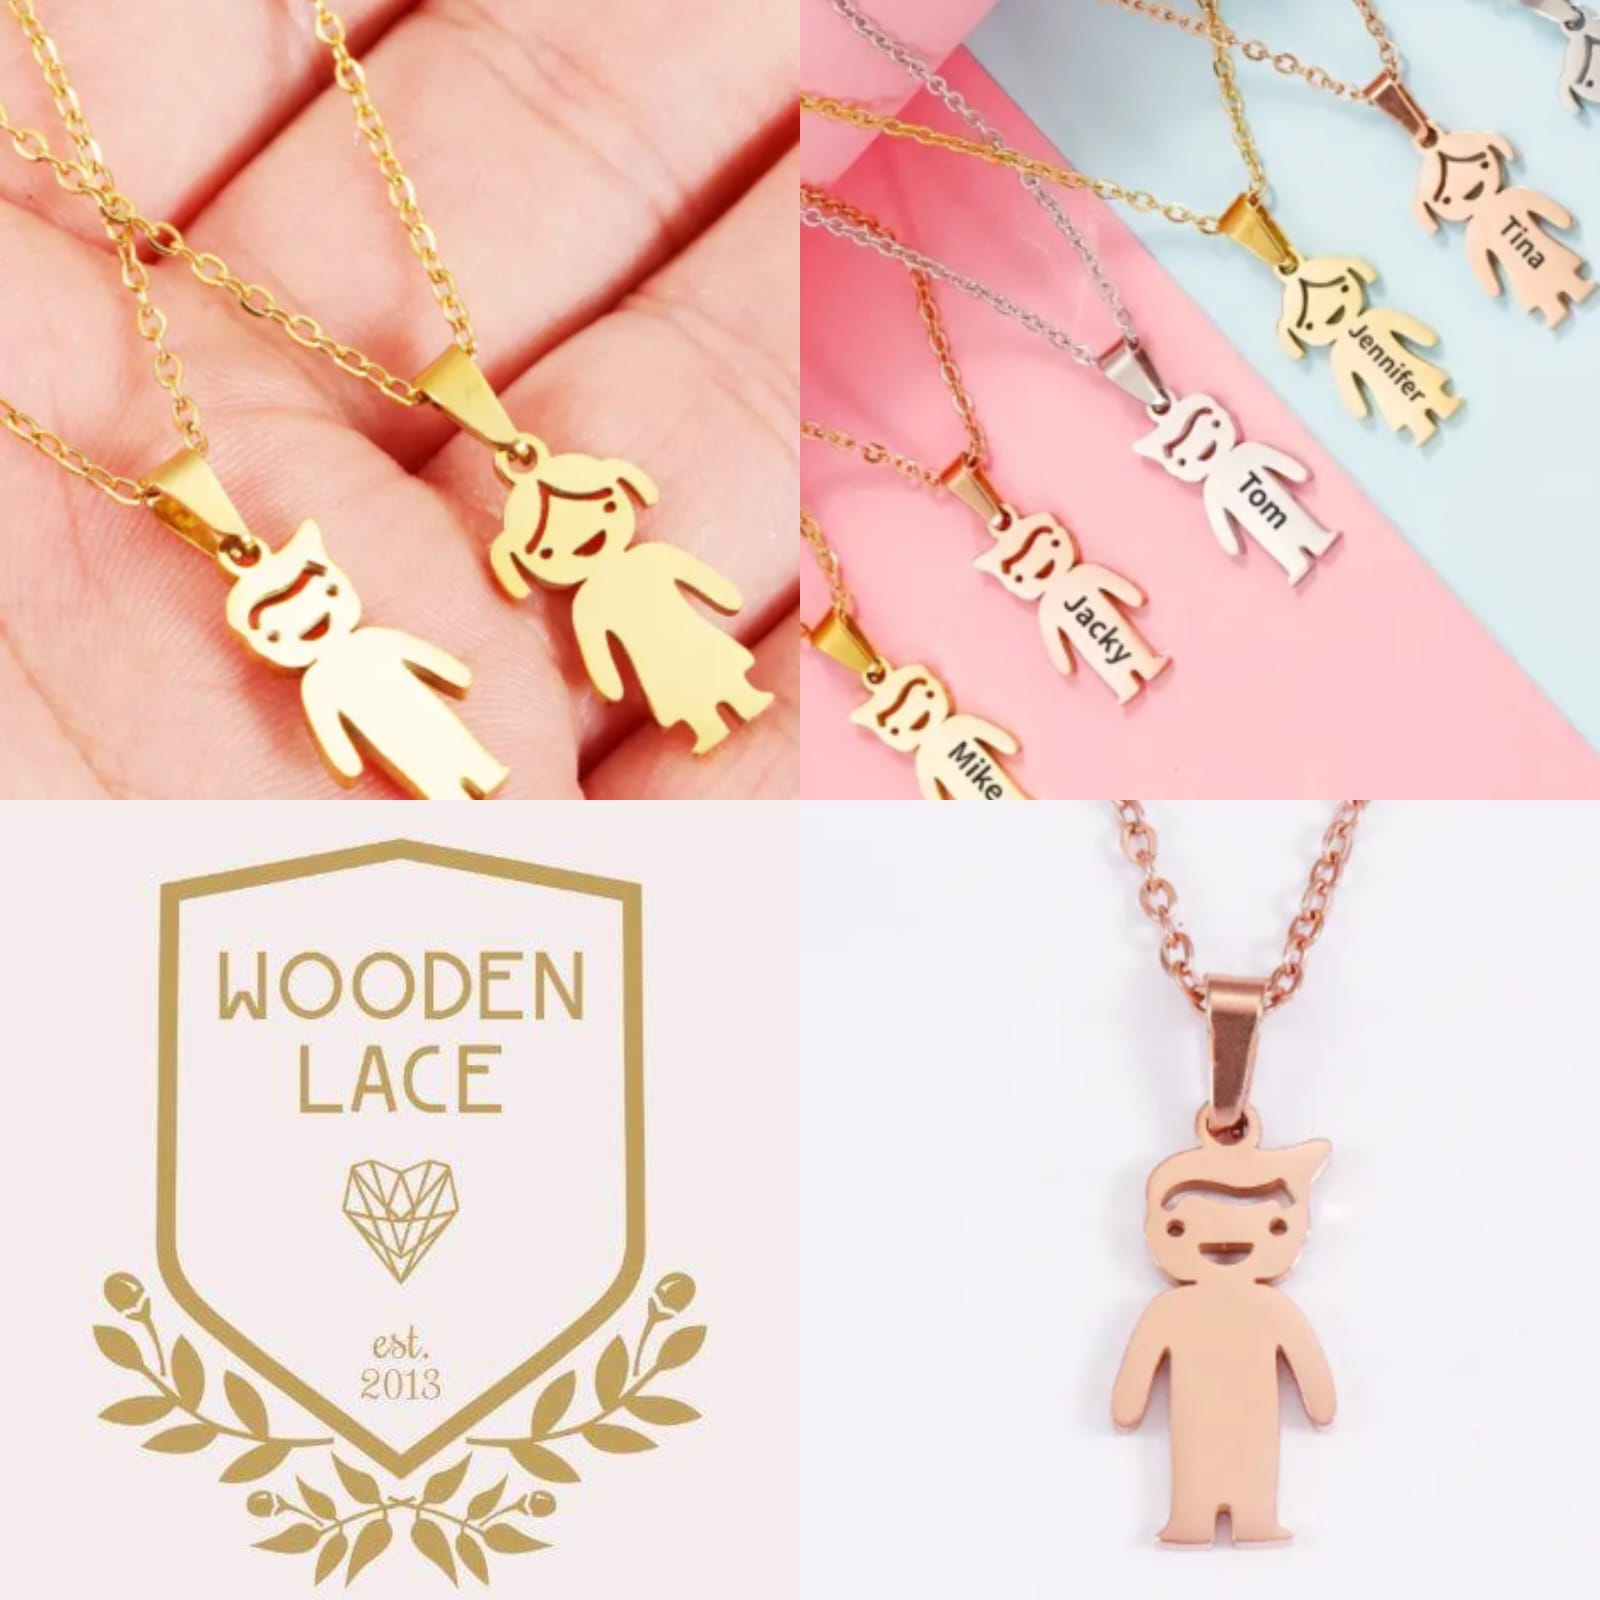 necklaces with engraved name R750 each. Available in Gold silver and rosegold. Waterproof and tarnish-proof.